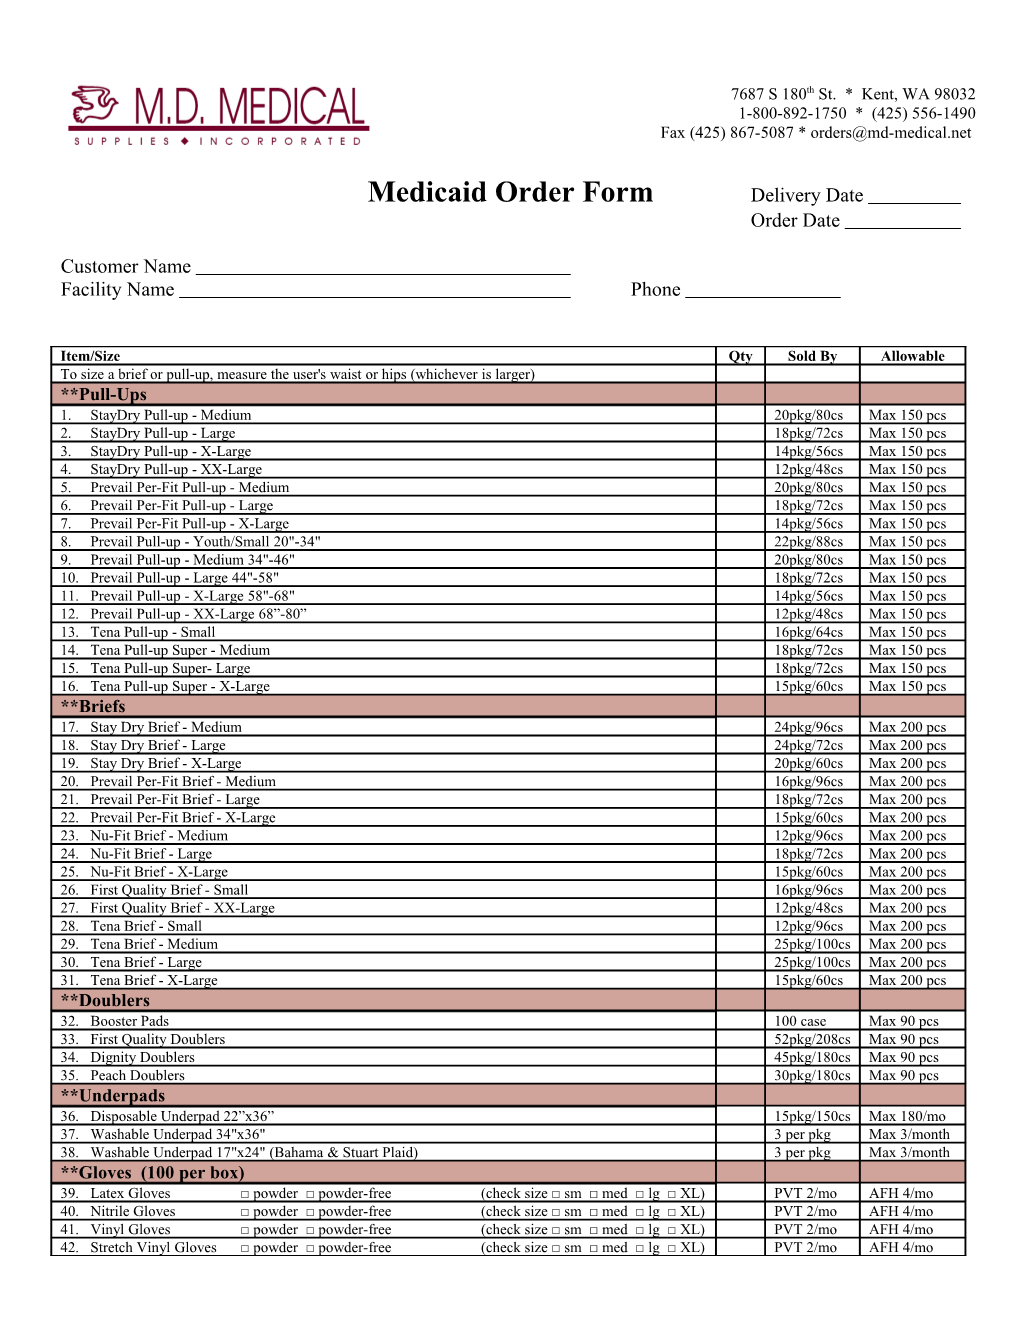 Medicaid Order Form Delivery Date